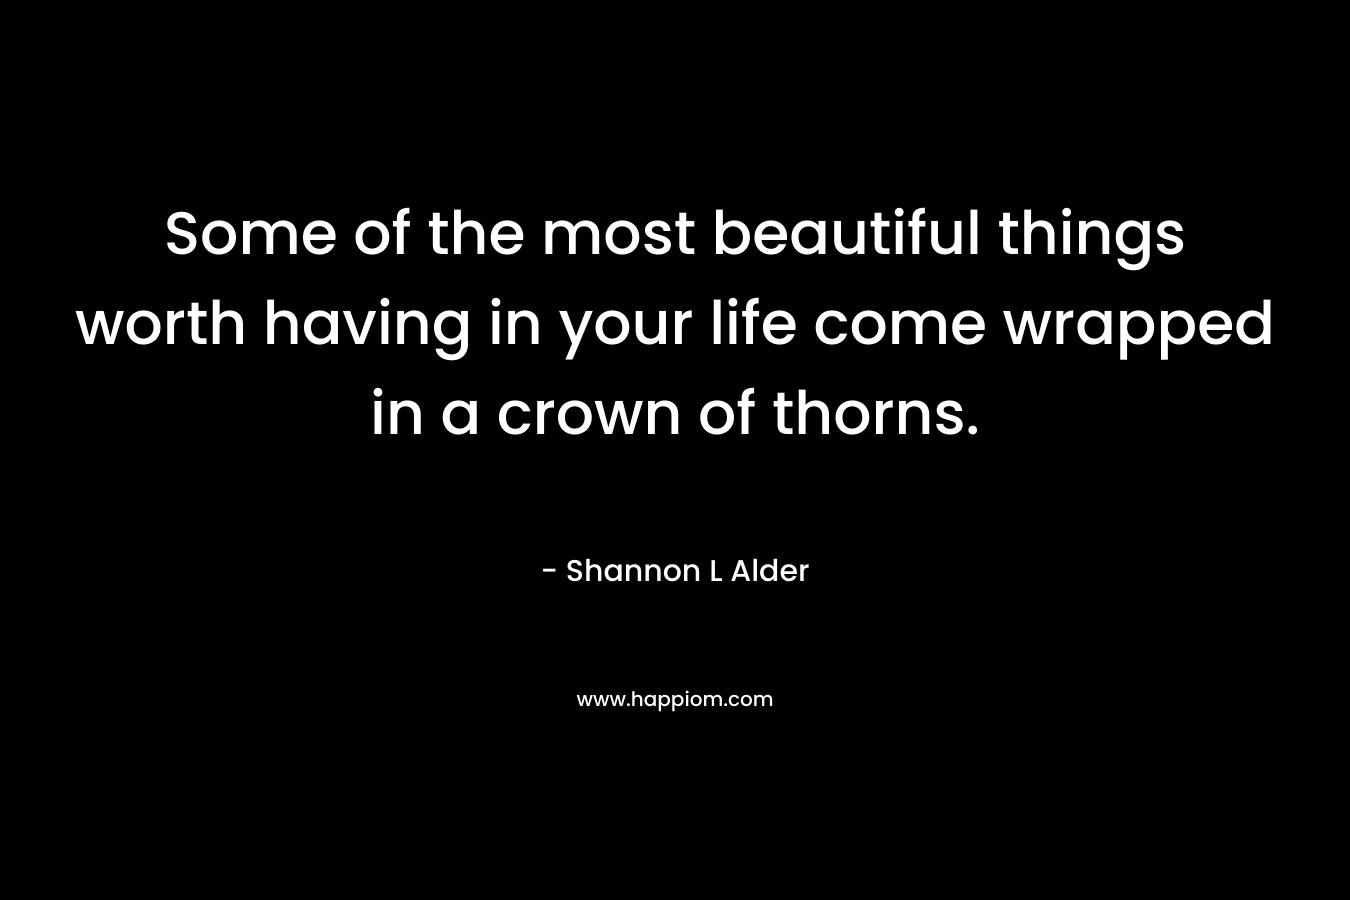 Some of the most beautiful things worth having in your life come wrapped in a crown of thorns.